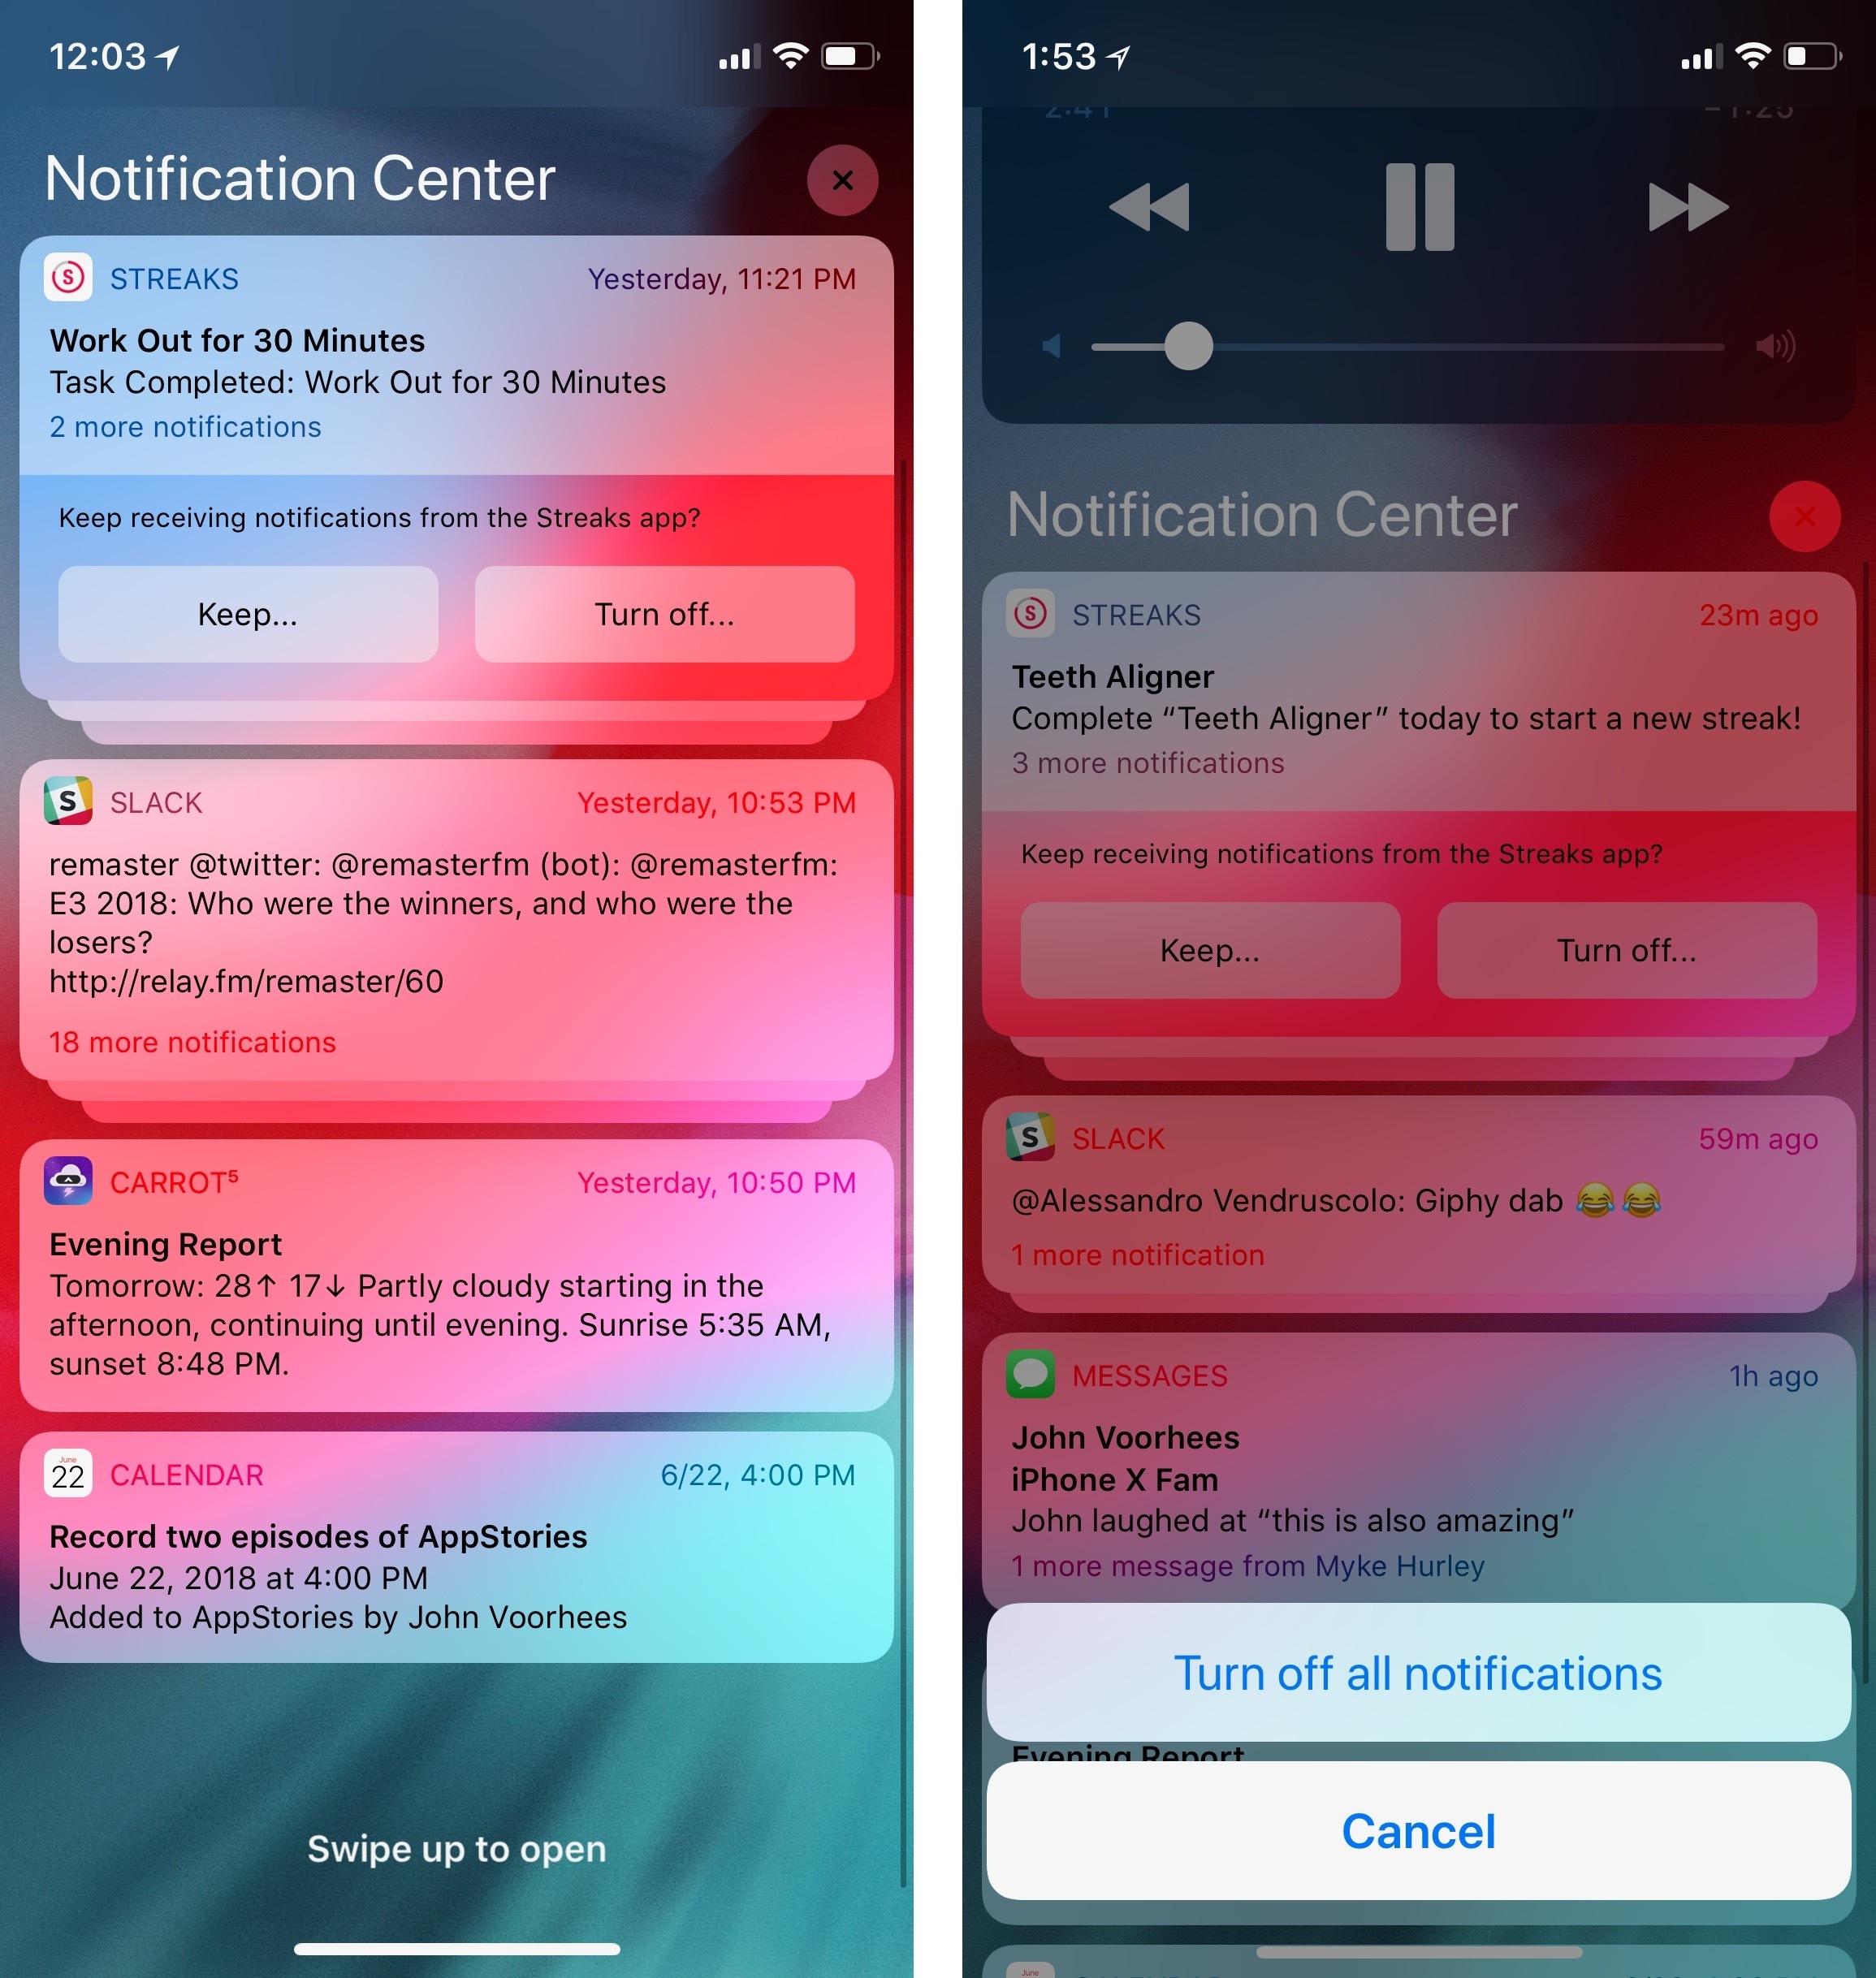 Siri can suggest turning off notifications with low engagement.